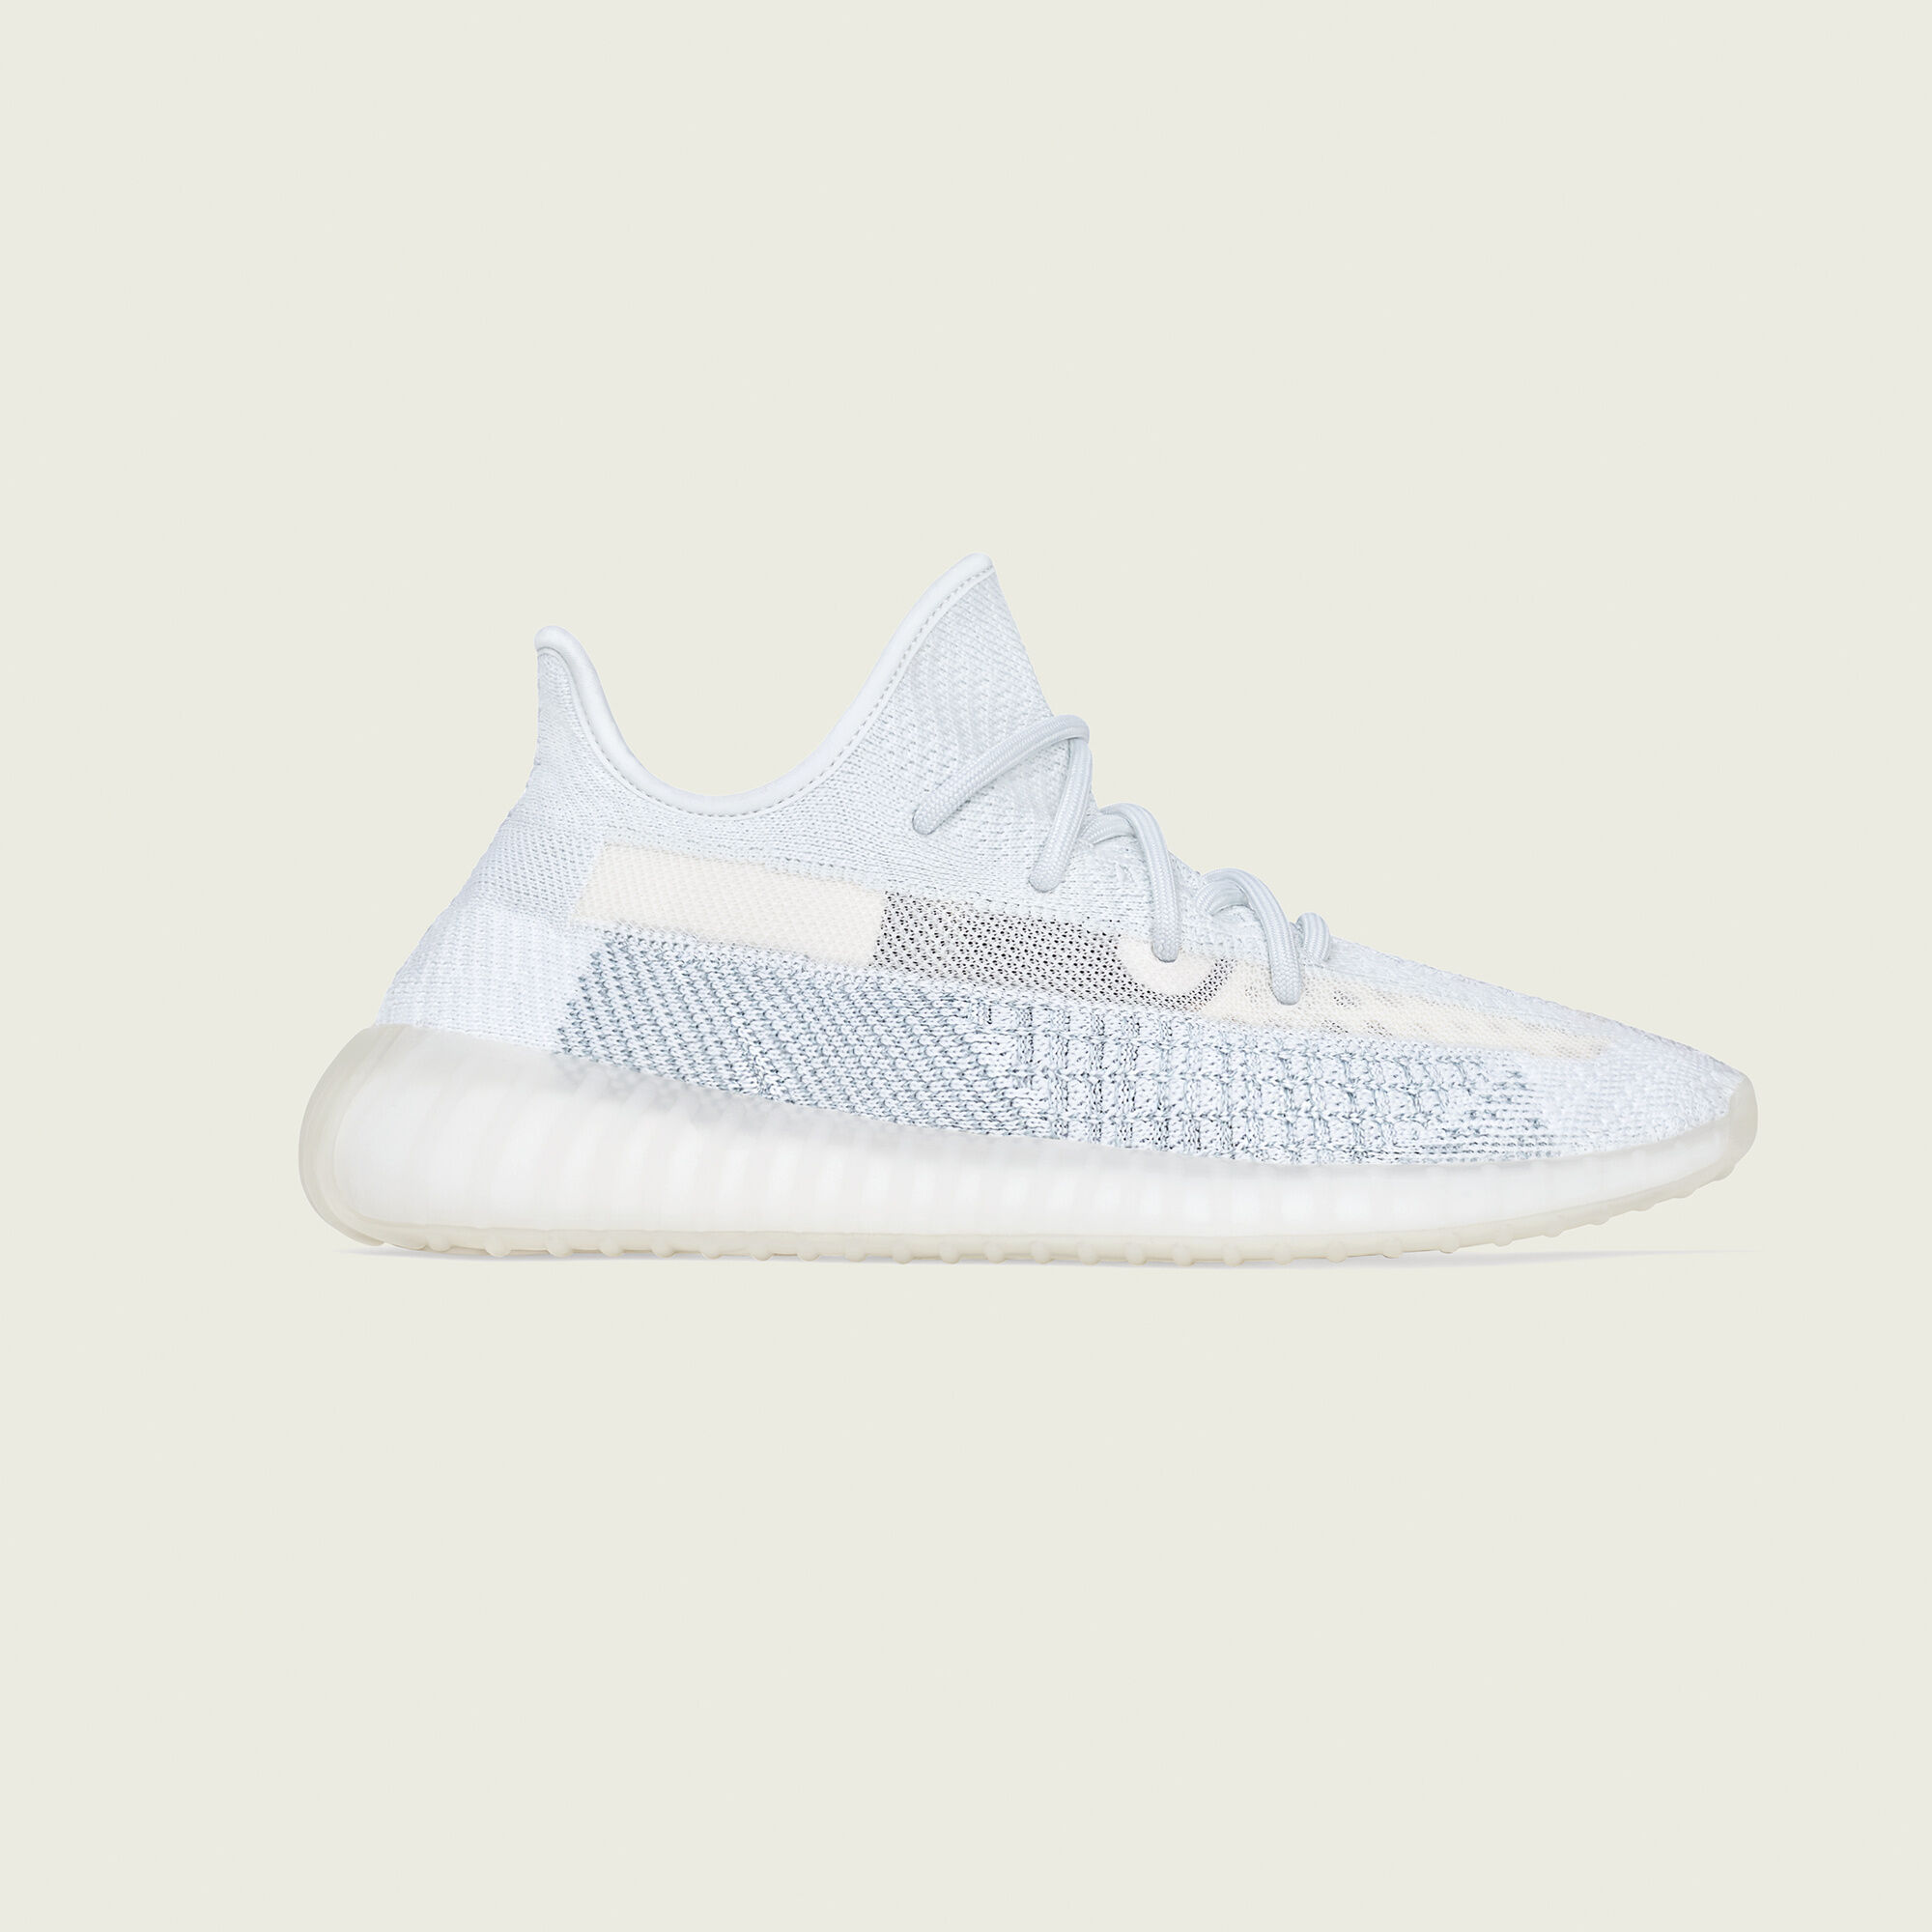 01-adidas-yeezy-boost-350-v2-cloud-white-non-reflective-fw3043